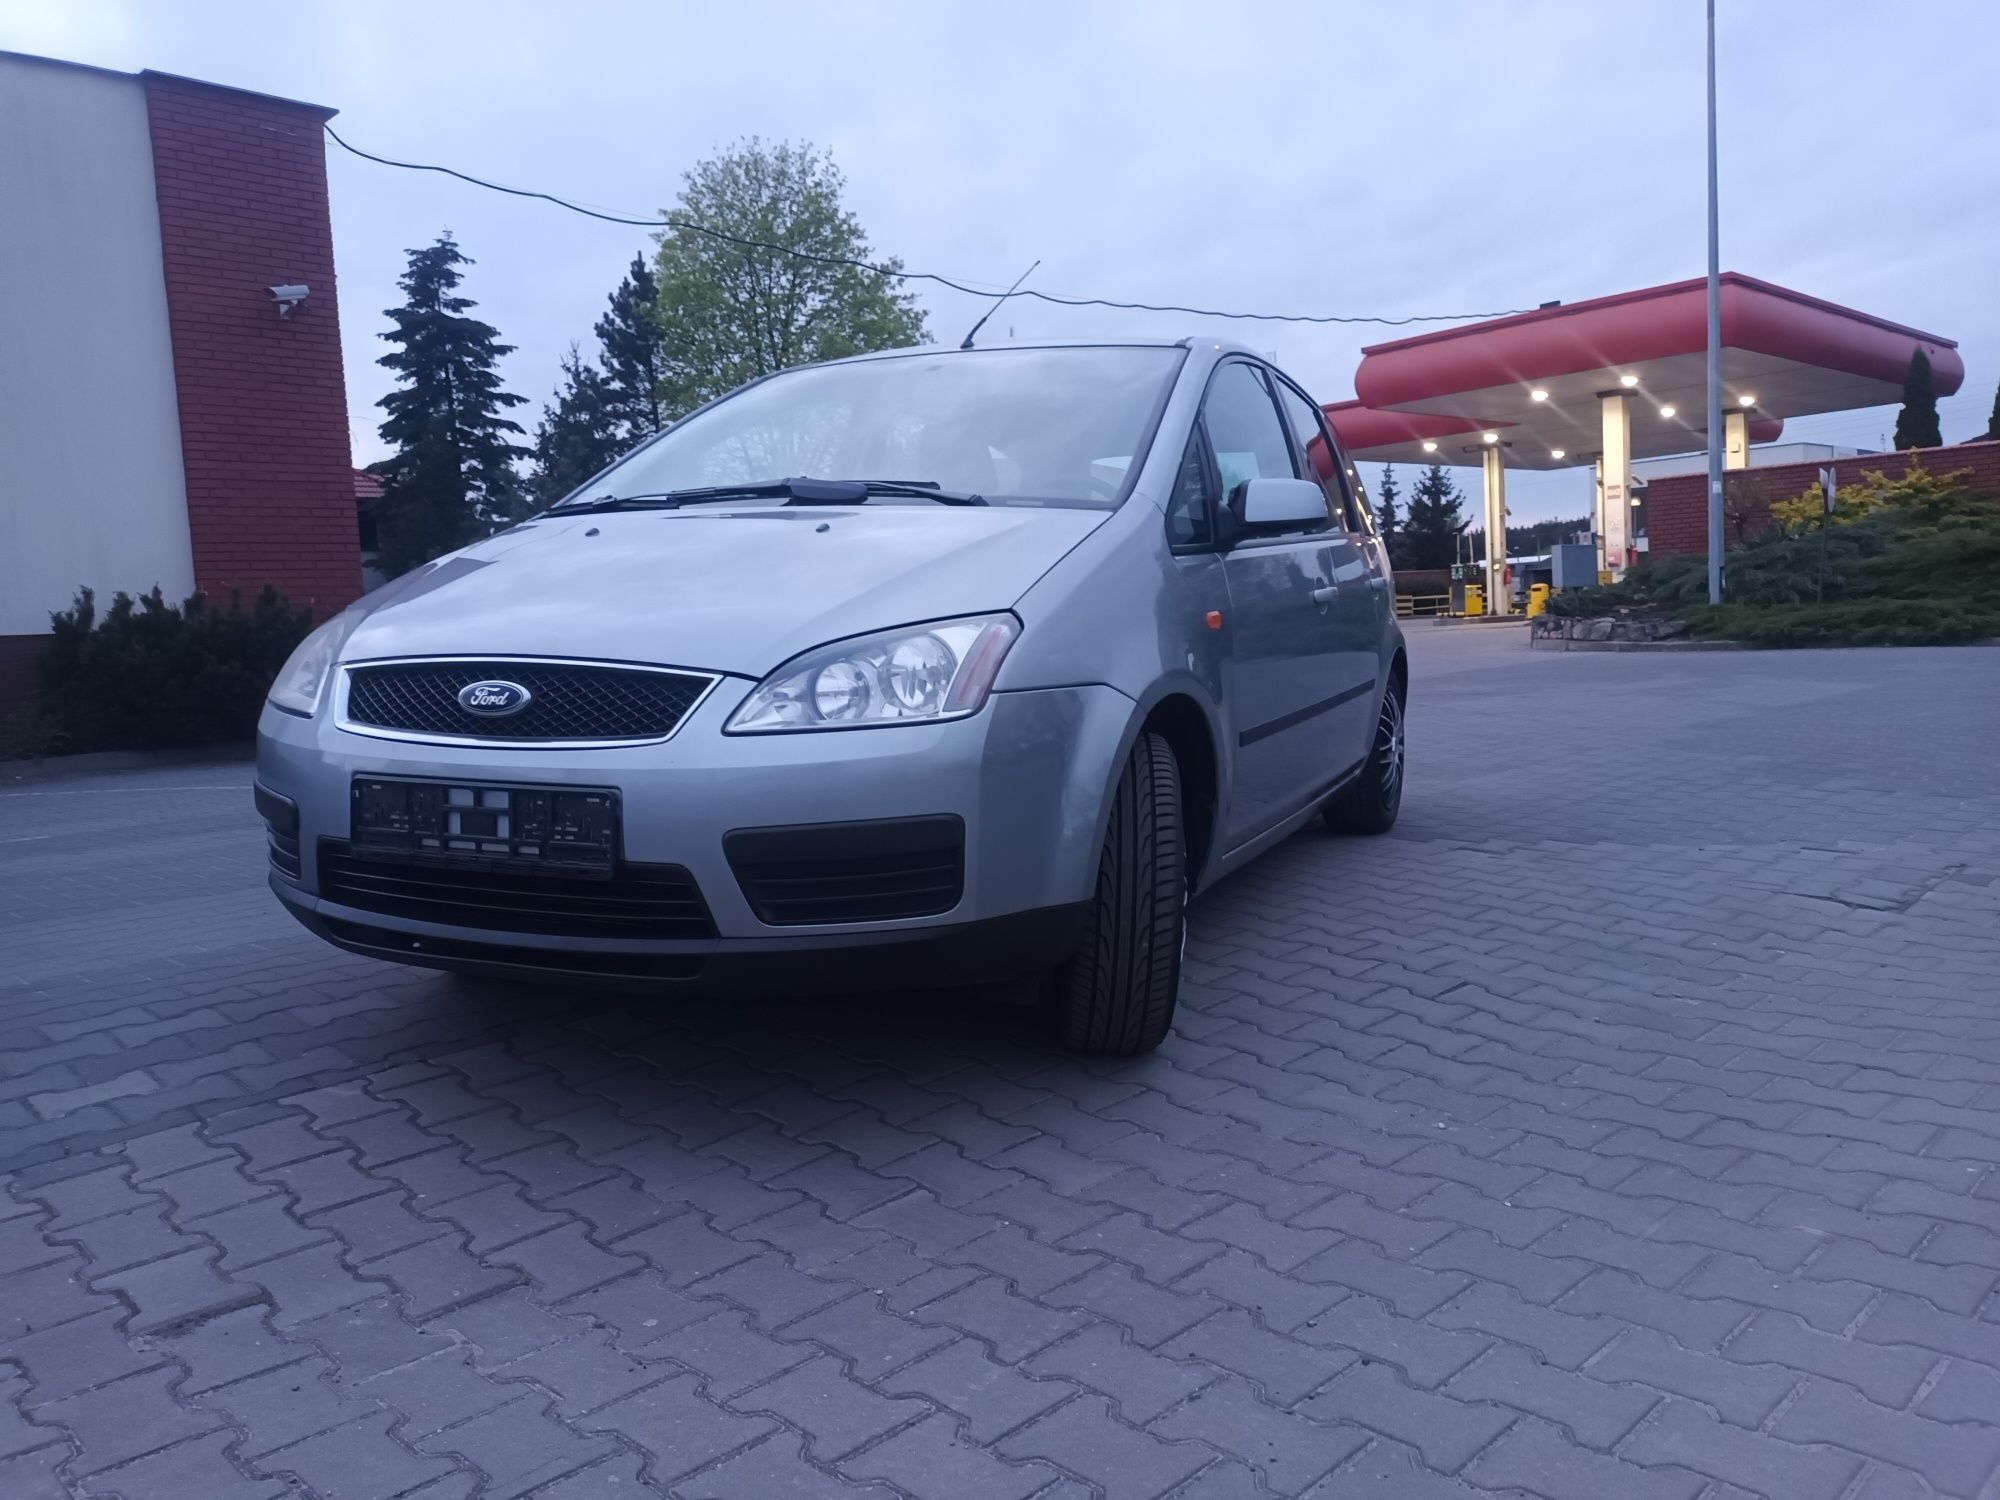 Ford focus C-max 1.8 benzyna